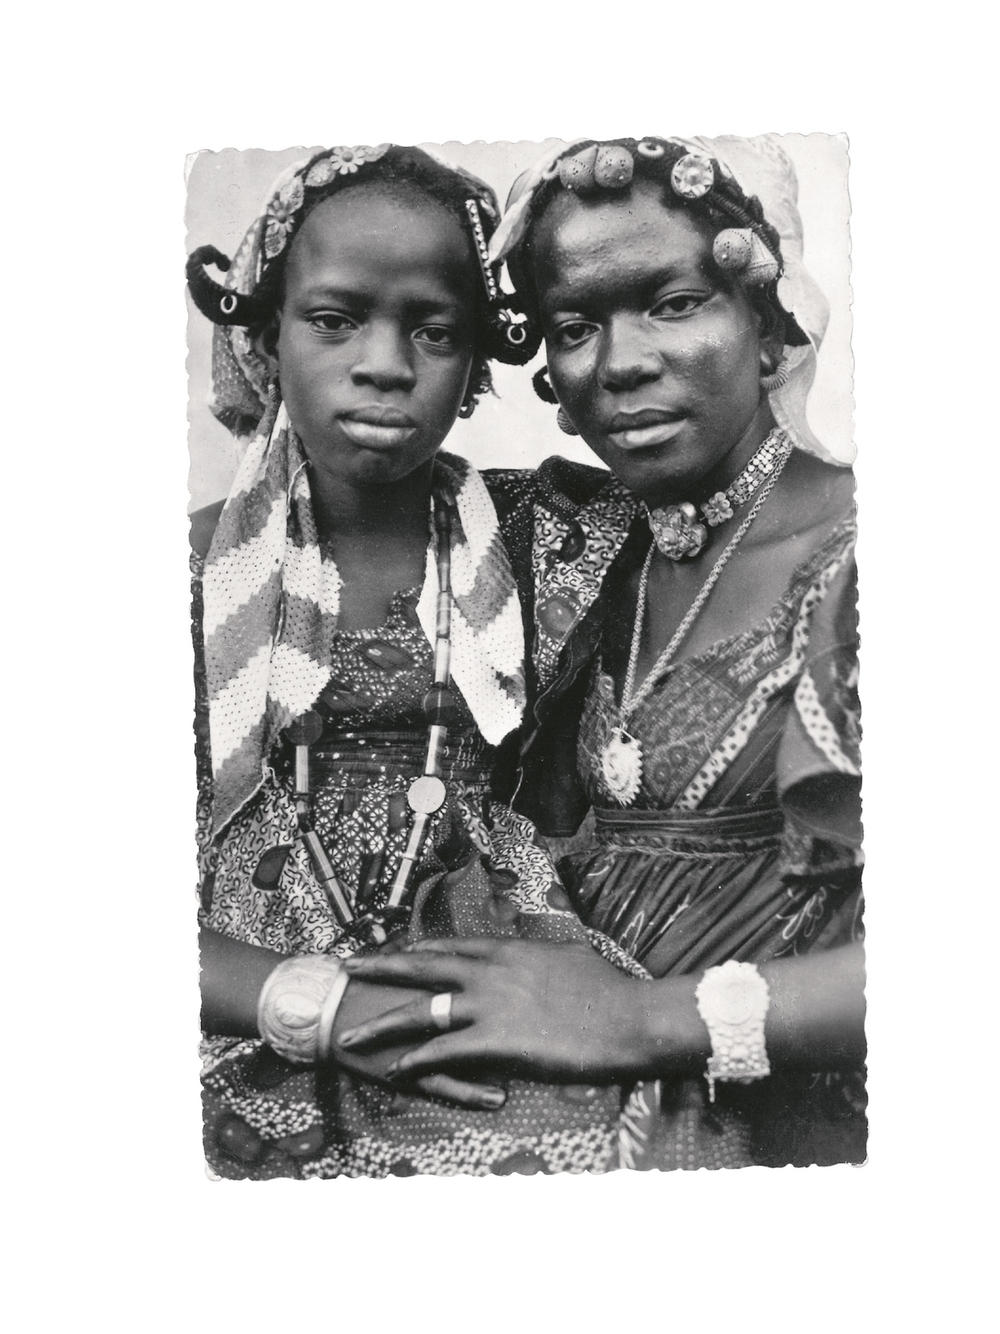 Untitled photo from Mali in the 1950s.